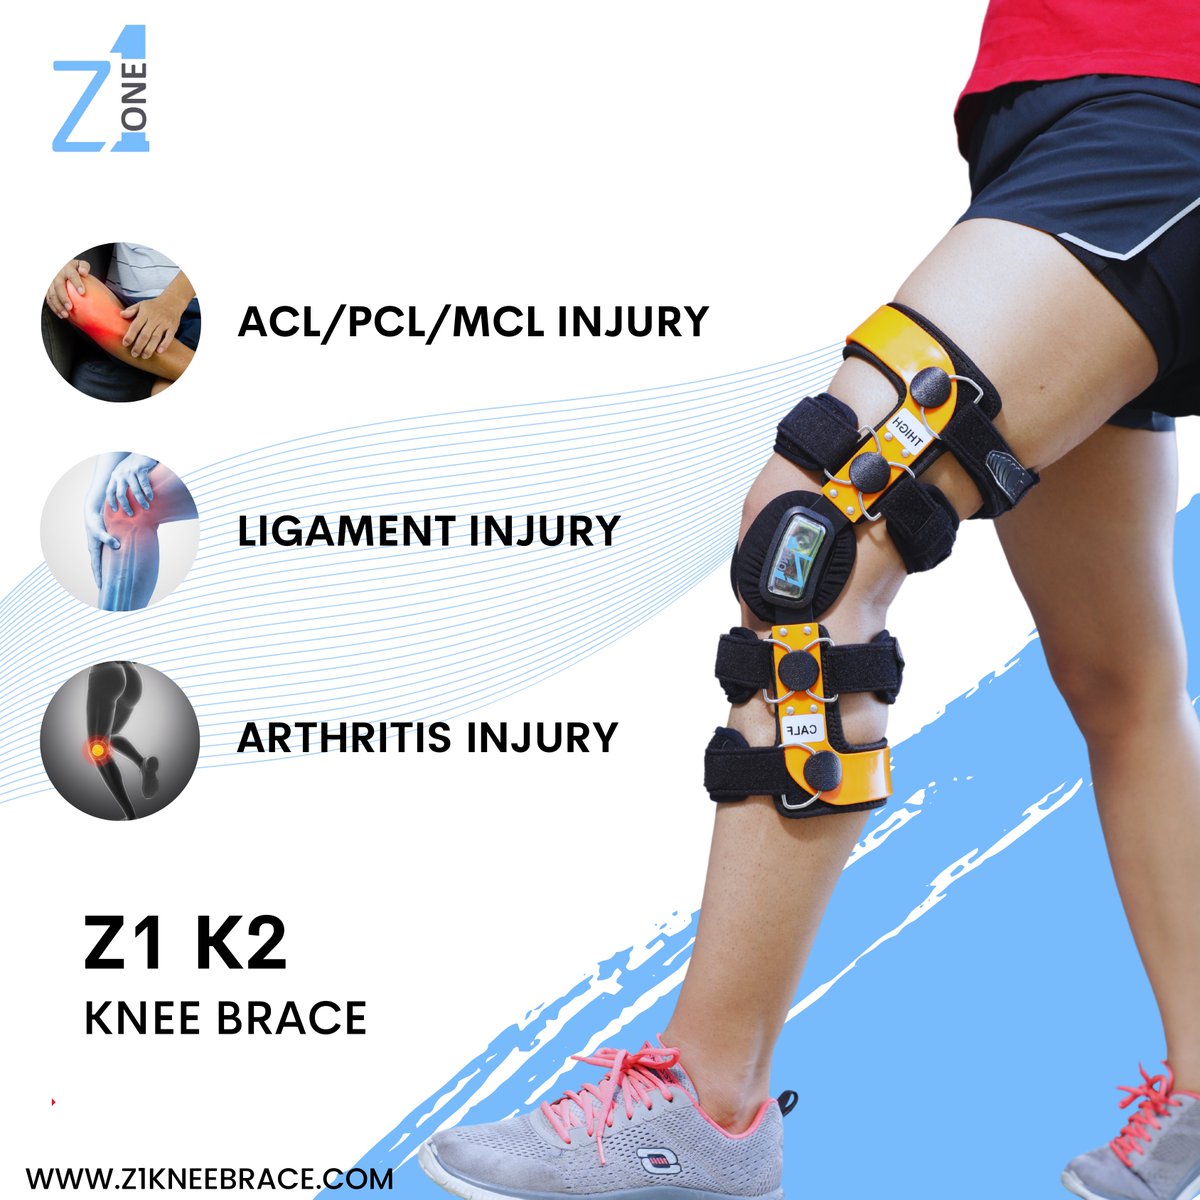 'We believe you deserve knee support that truly fits- that's why we created ours seriously good!'

z1kneebrace.com

#kneebrace #medicaldevices #knee #orthosis #kneepain #medicalsupplies #z1kneebrace #ACLinjuries #MCLInjury #PCLInjury #arthritis